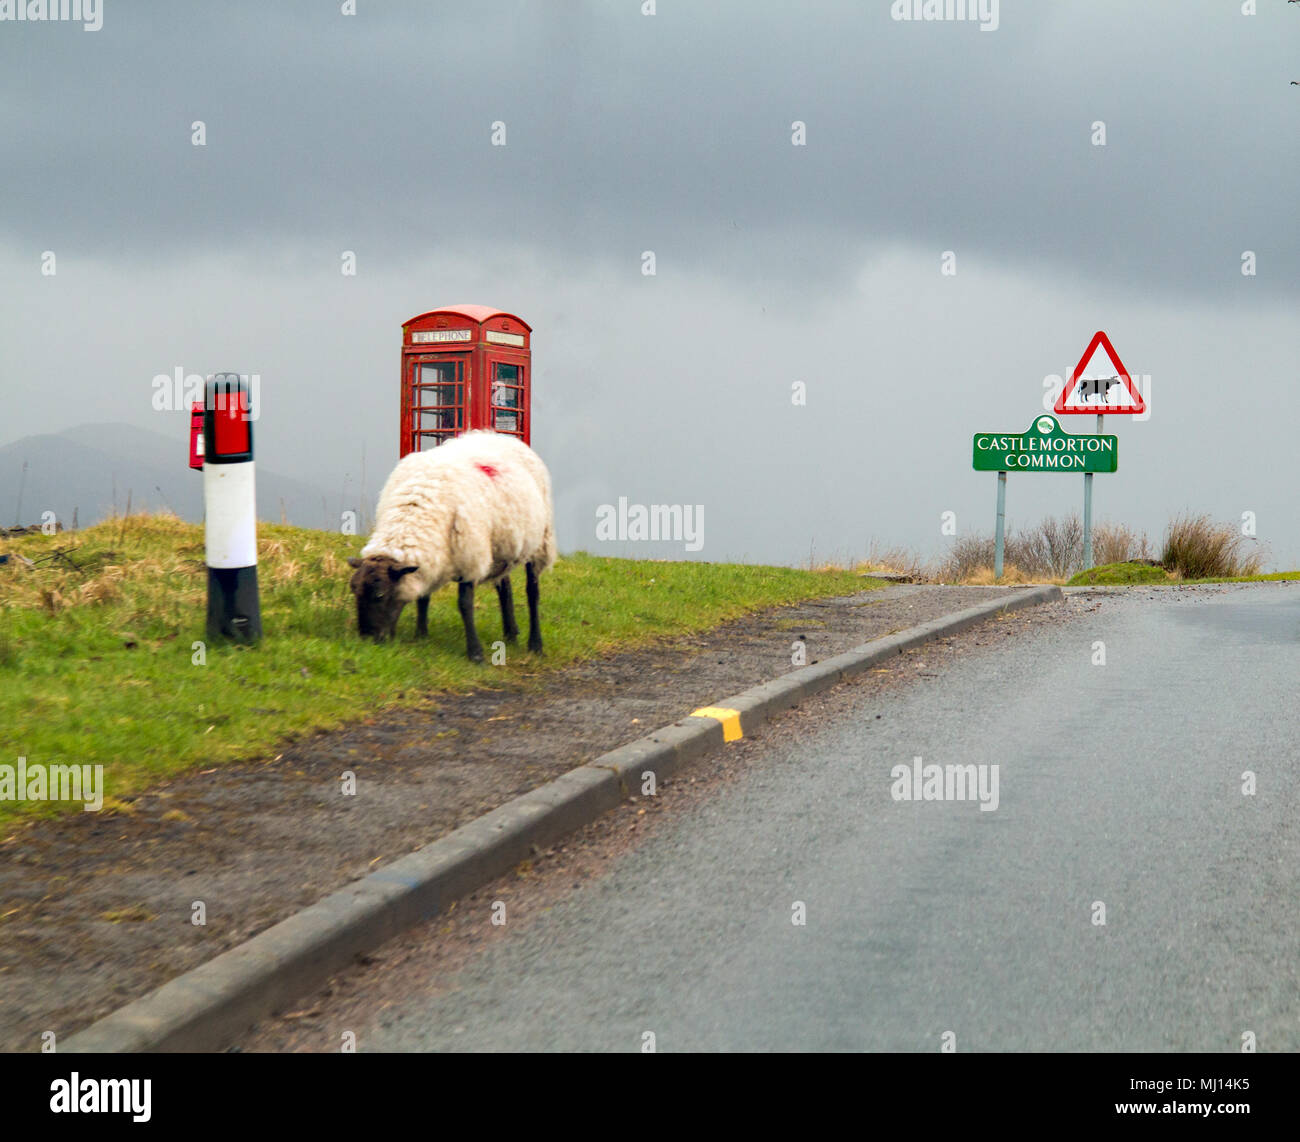 Sheep grazing by the side of the road at CastleMorton common  in the Malvern hills Gloucestershire in front of a English  traditional red phone box Stock Photo